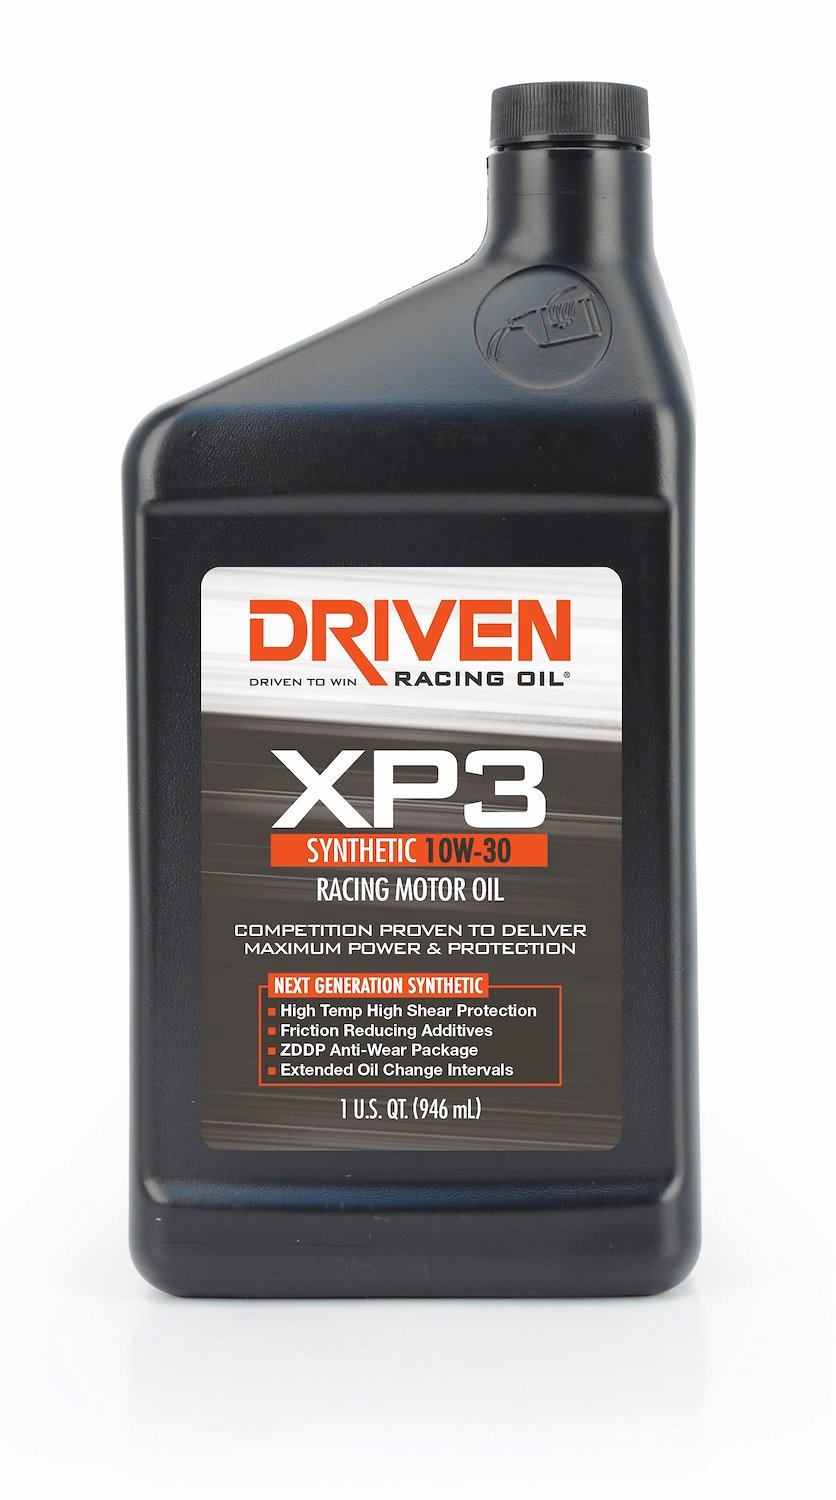 XP3 SAE 10W-30 Synthetic Racing Oil 1 Quart